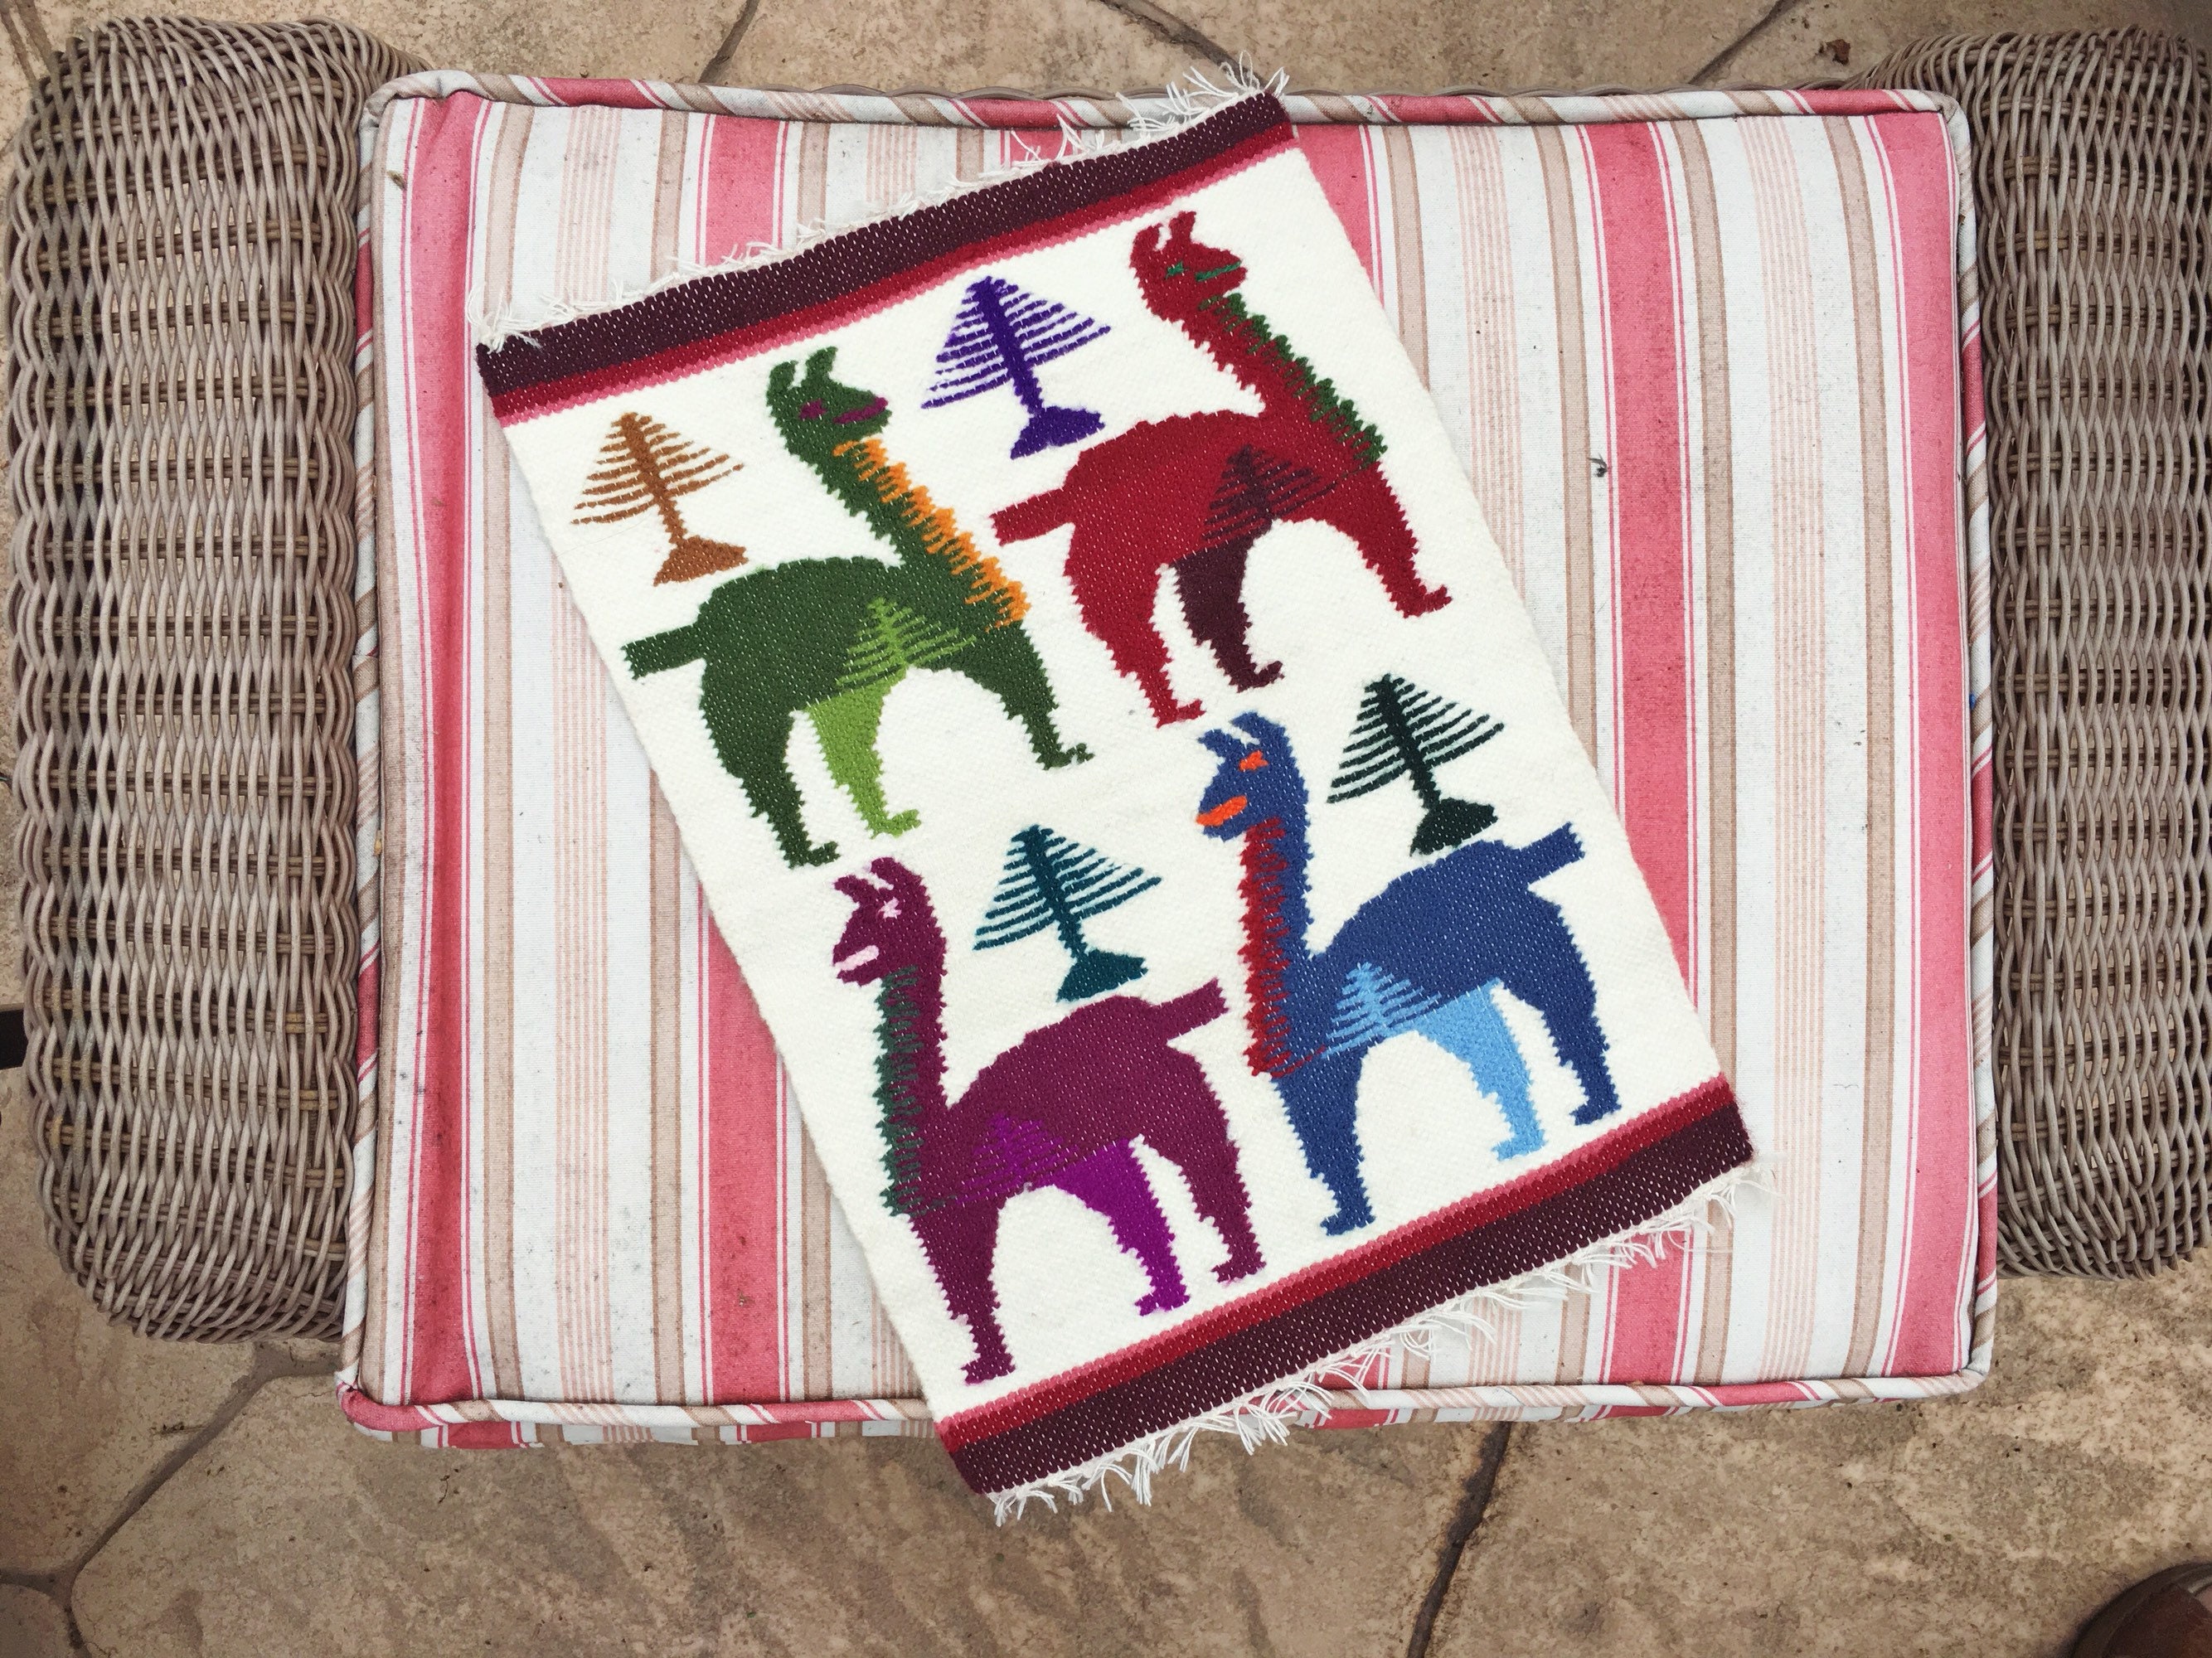 Woven Wool Placemat or Small Table Runners Llamas Alpacas ...